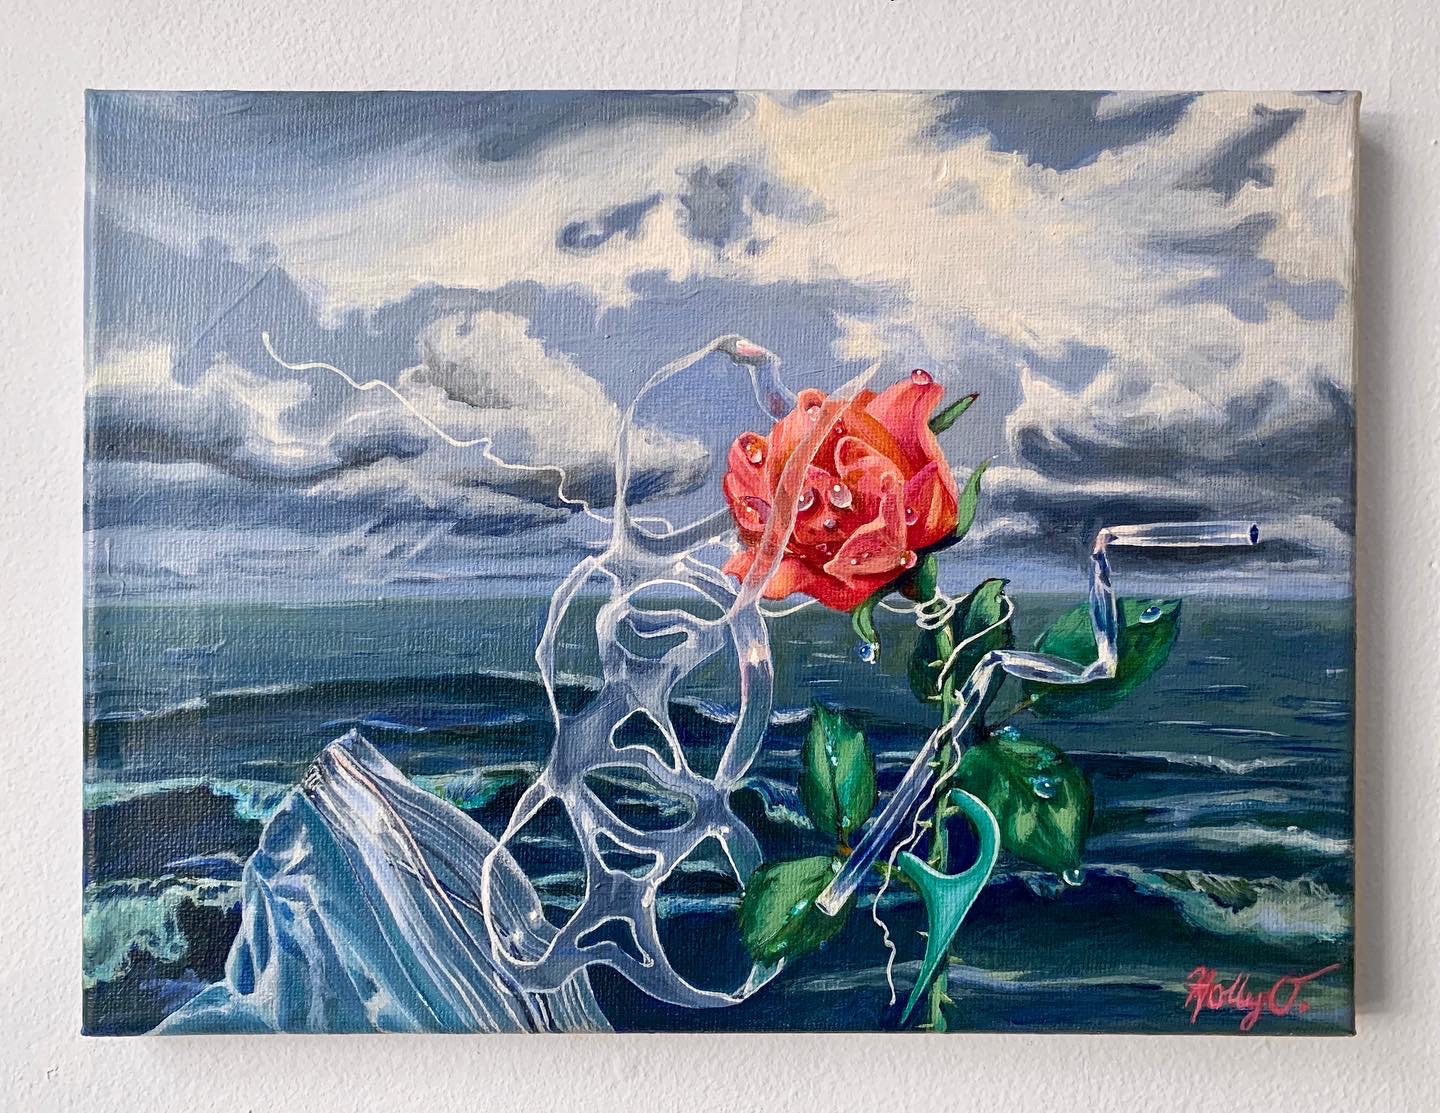 Invasive, 10x12 2020 <br>acrylic on canvas<br><br>This was the first painting I made of this series. I was house-sitting in New Orleans during the Summer of 2020, tending a big rose garden. While cutting back the fast growing weeds every day, I had the idea to represent single use plastics as an invasive weed, and roses to act as solutions, victims, witnesses and souvenirs of environmental concerns.